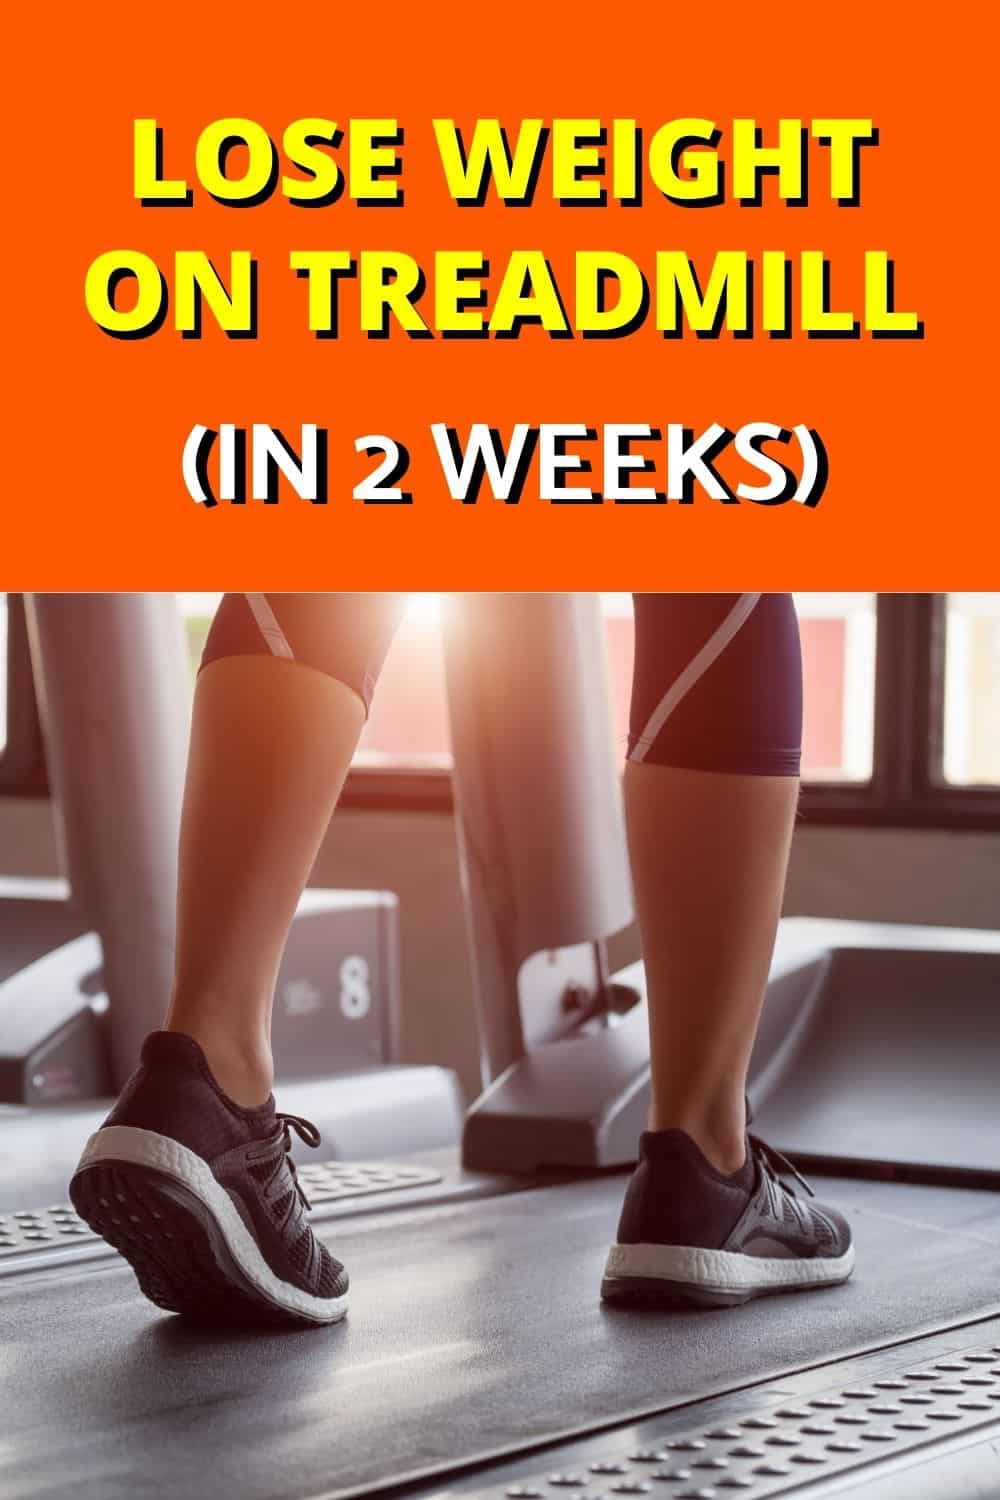 Lose Weight On Treadmill In 2 Weeks Pin-min